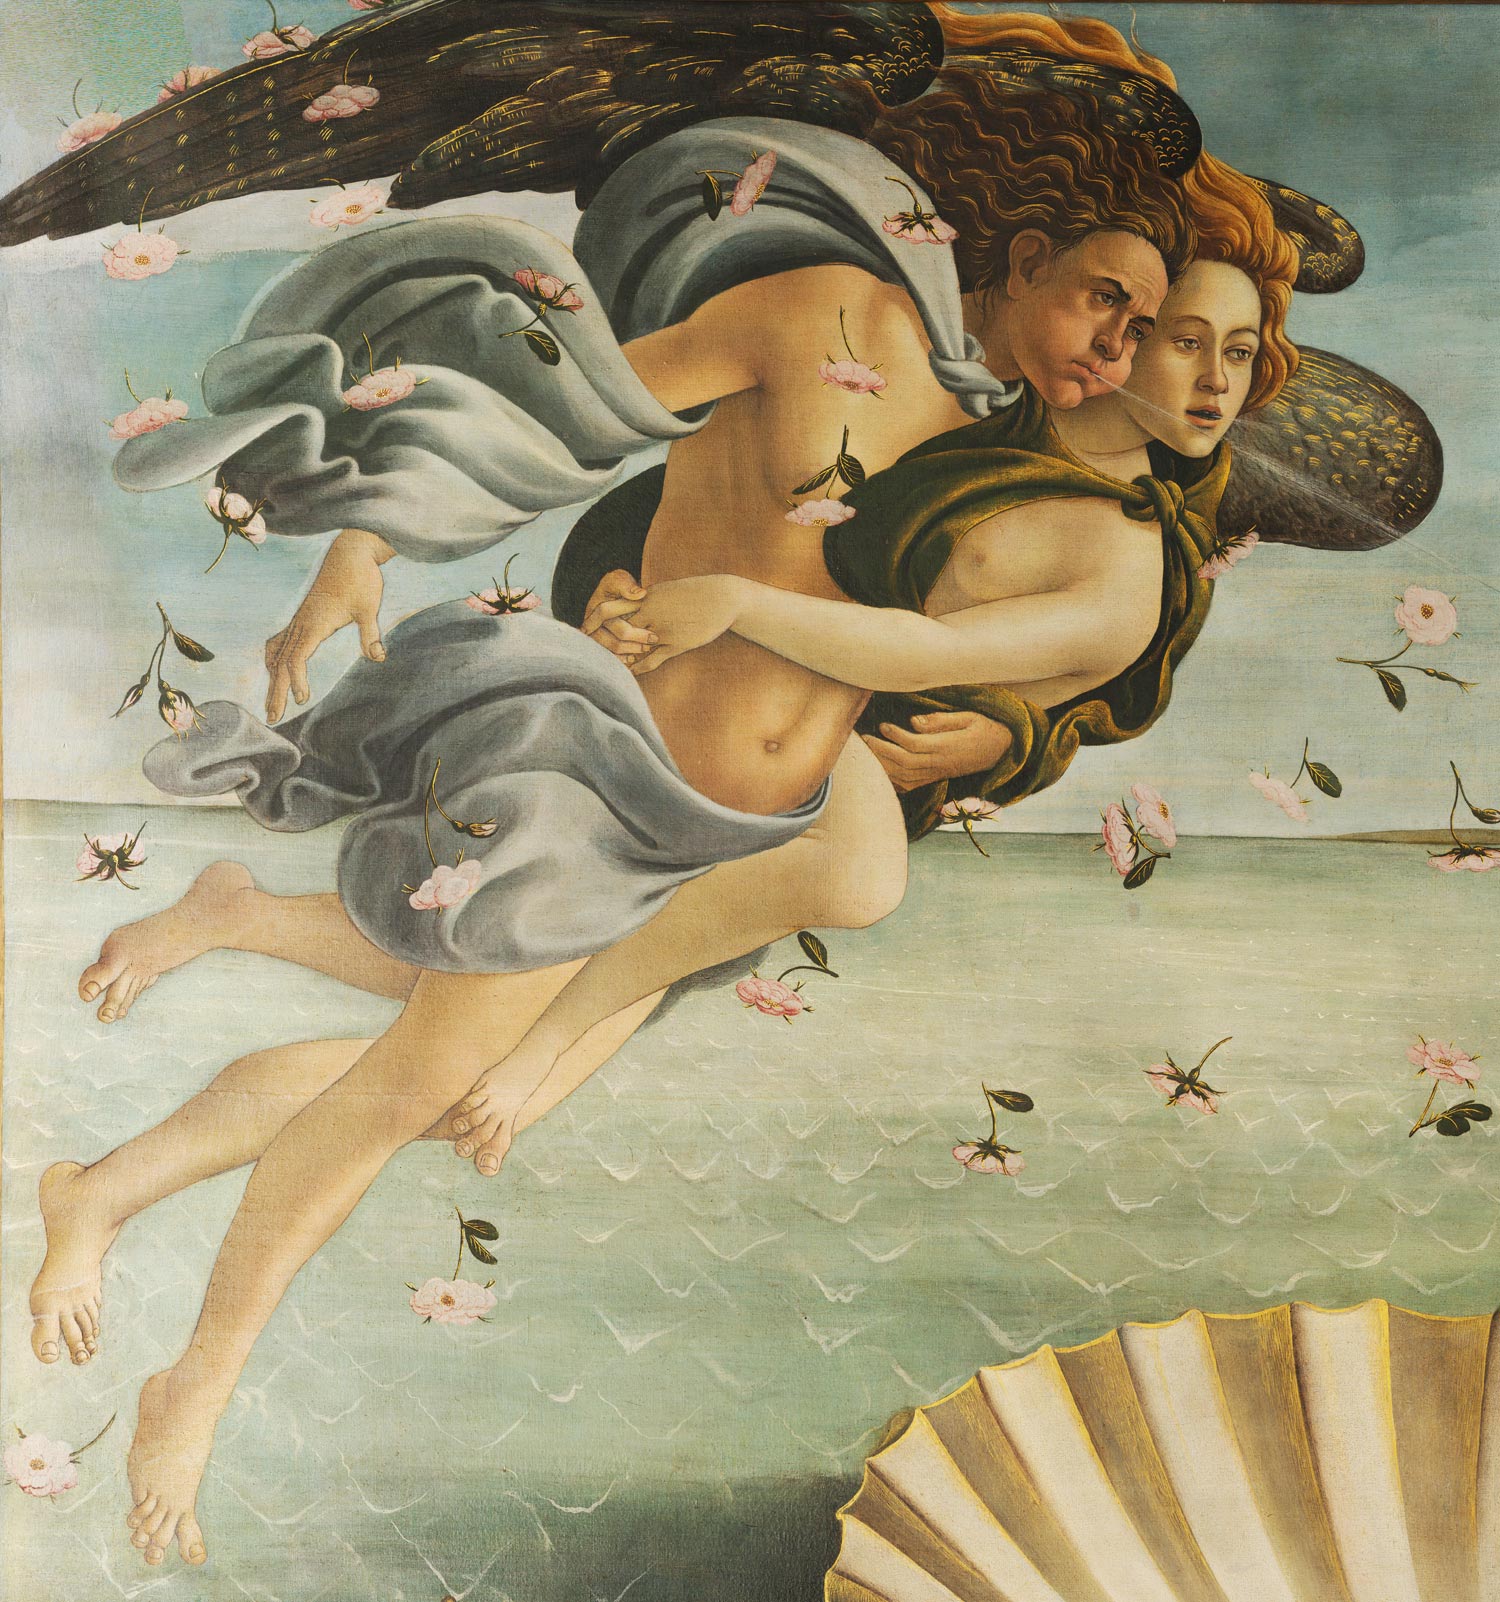 Sandro Botticelli, Birth of Venus, the winds Zephyr and Aura